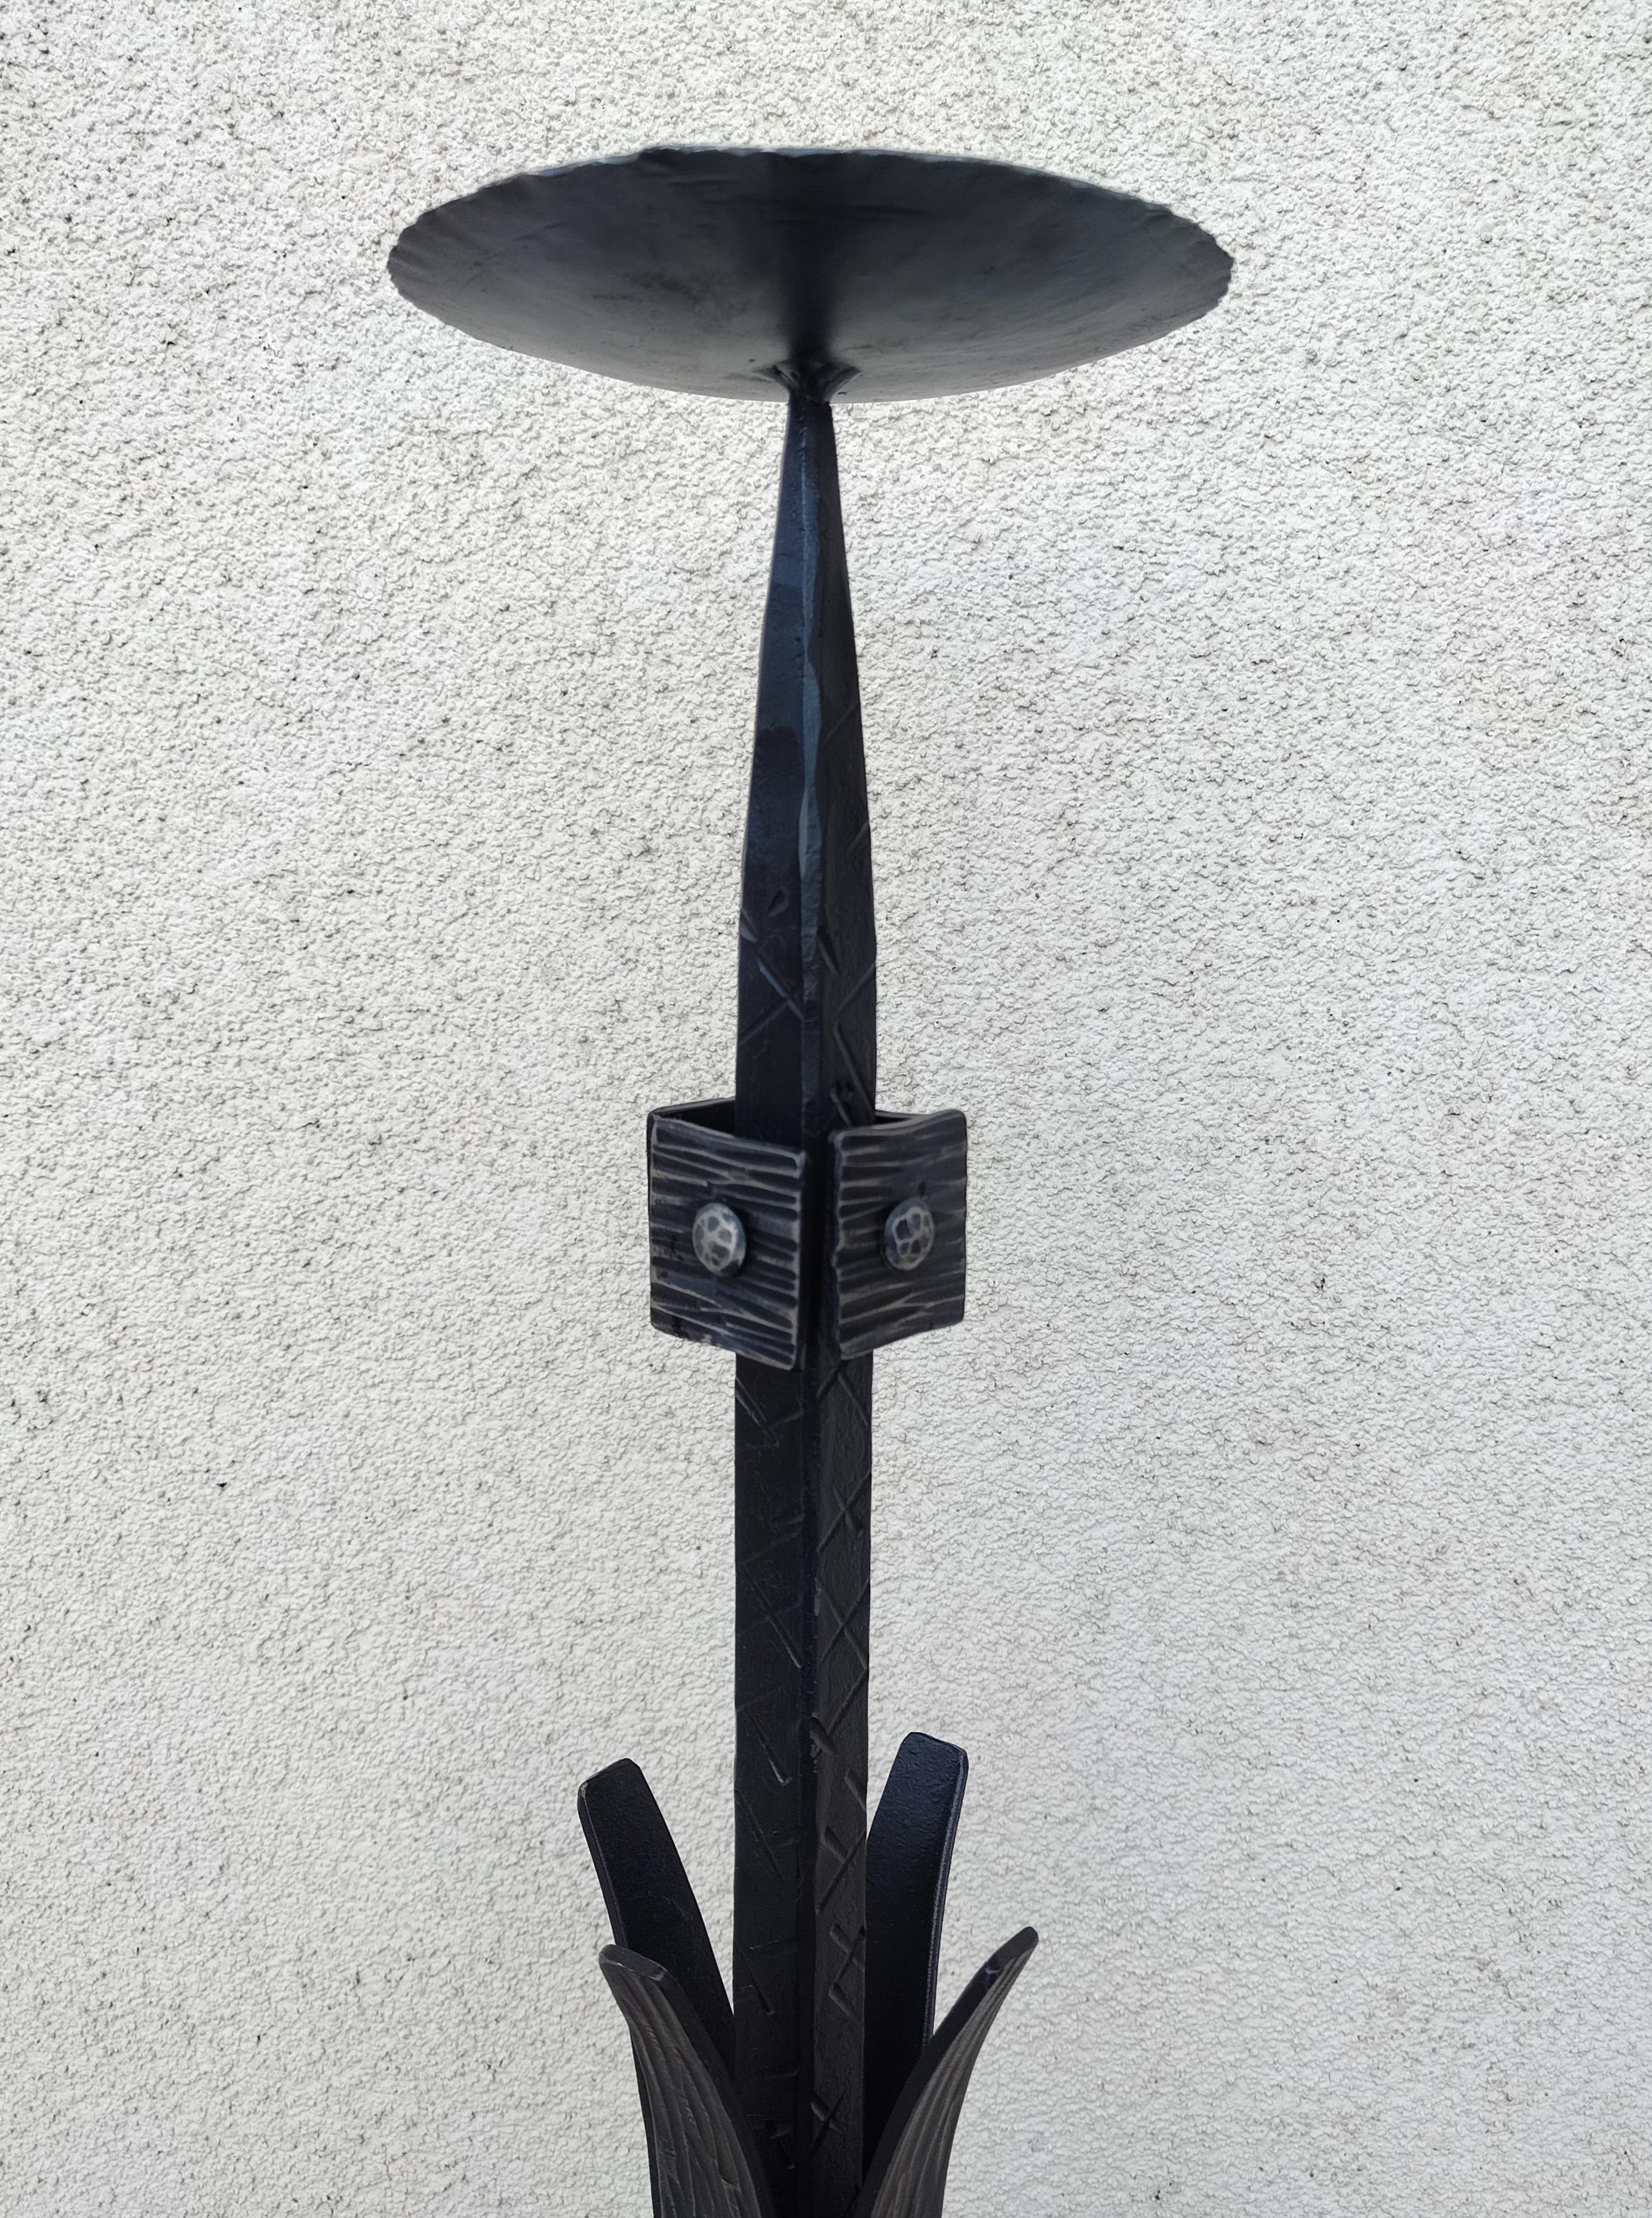 In this listing you will find an extra large brutalist candlestick holder done in Wrought Iron. It features a single candle stand and a very impressive, powerful design. This piece is handmade. Made in Western Germany in 1970s.

Very good vintage